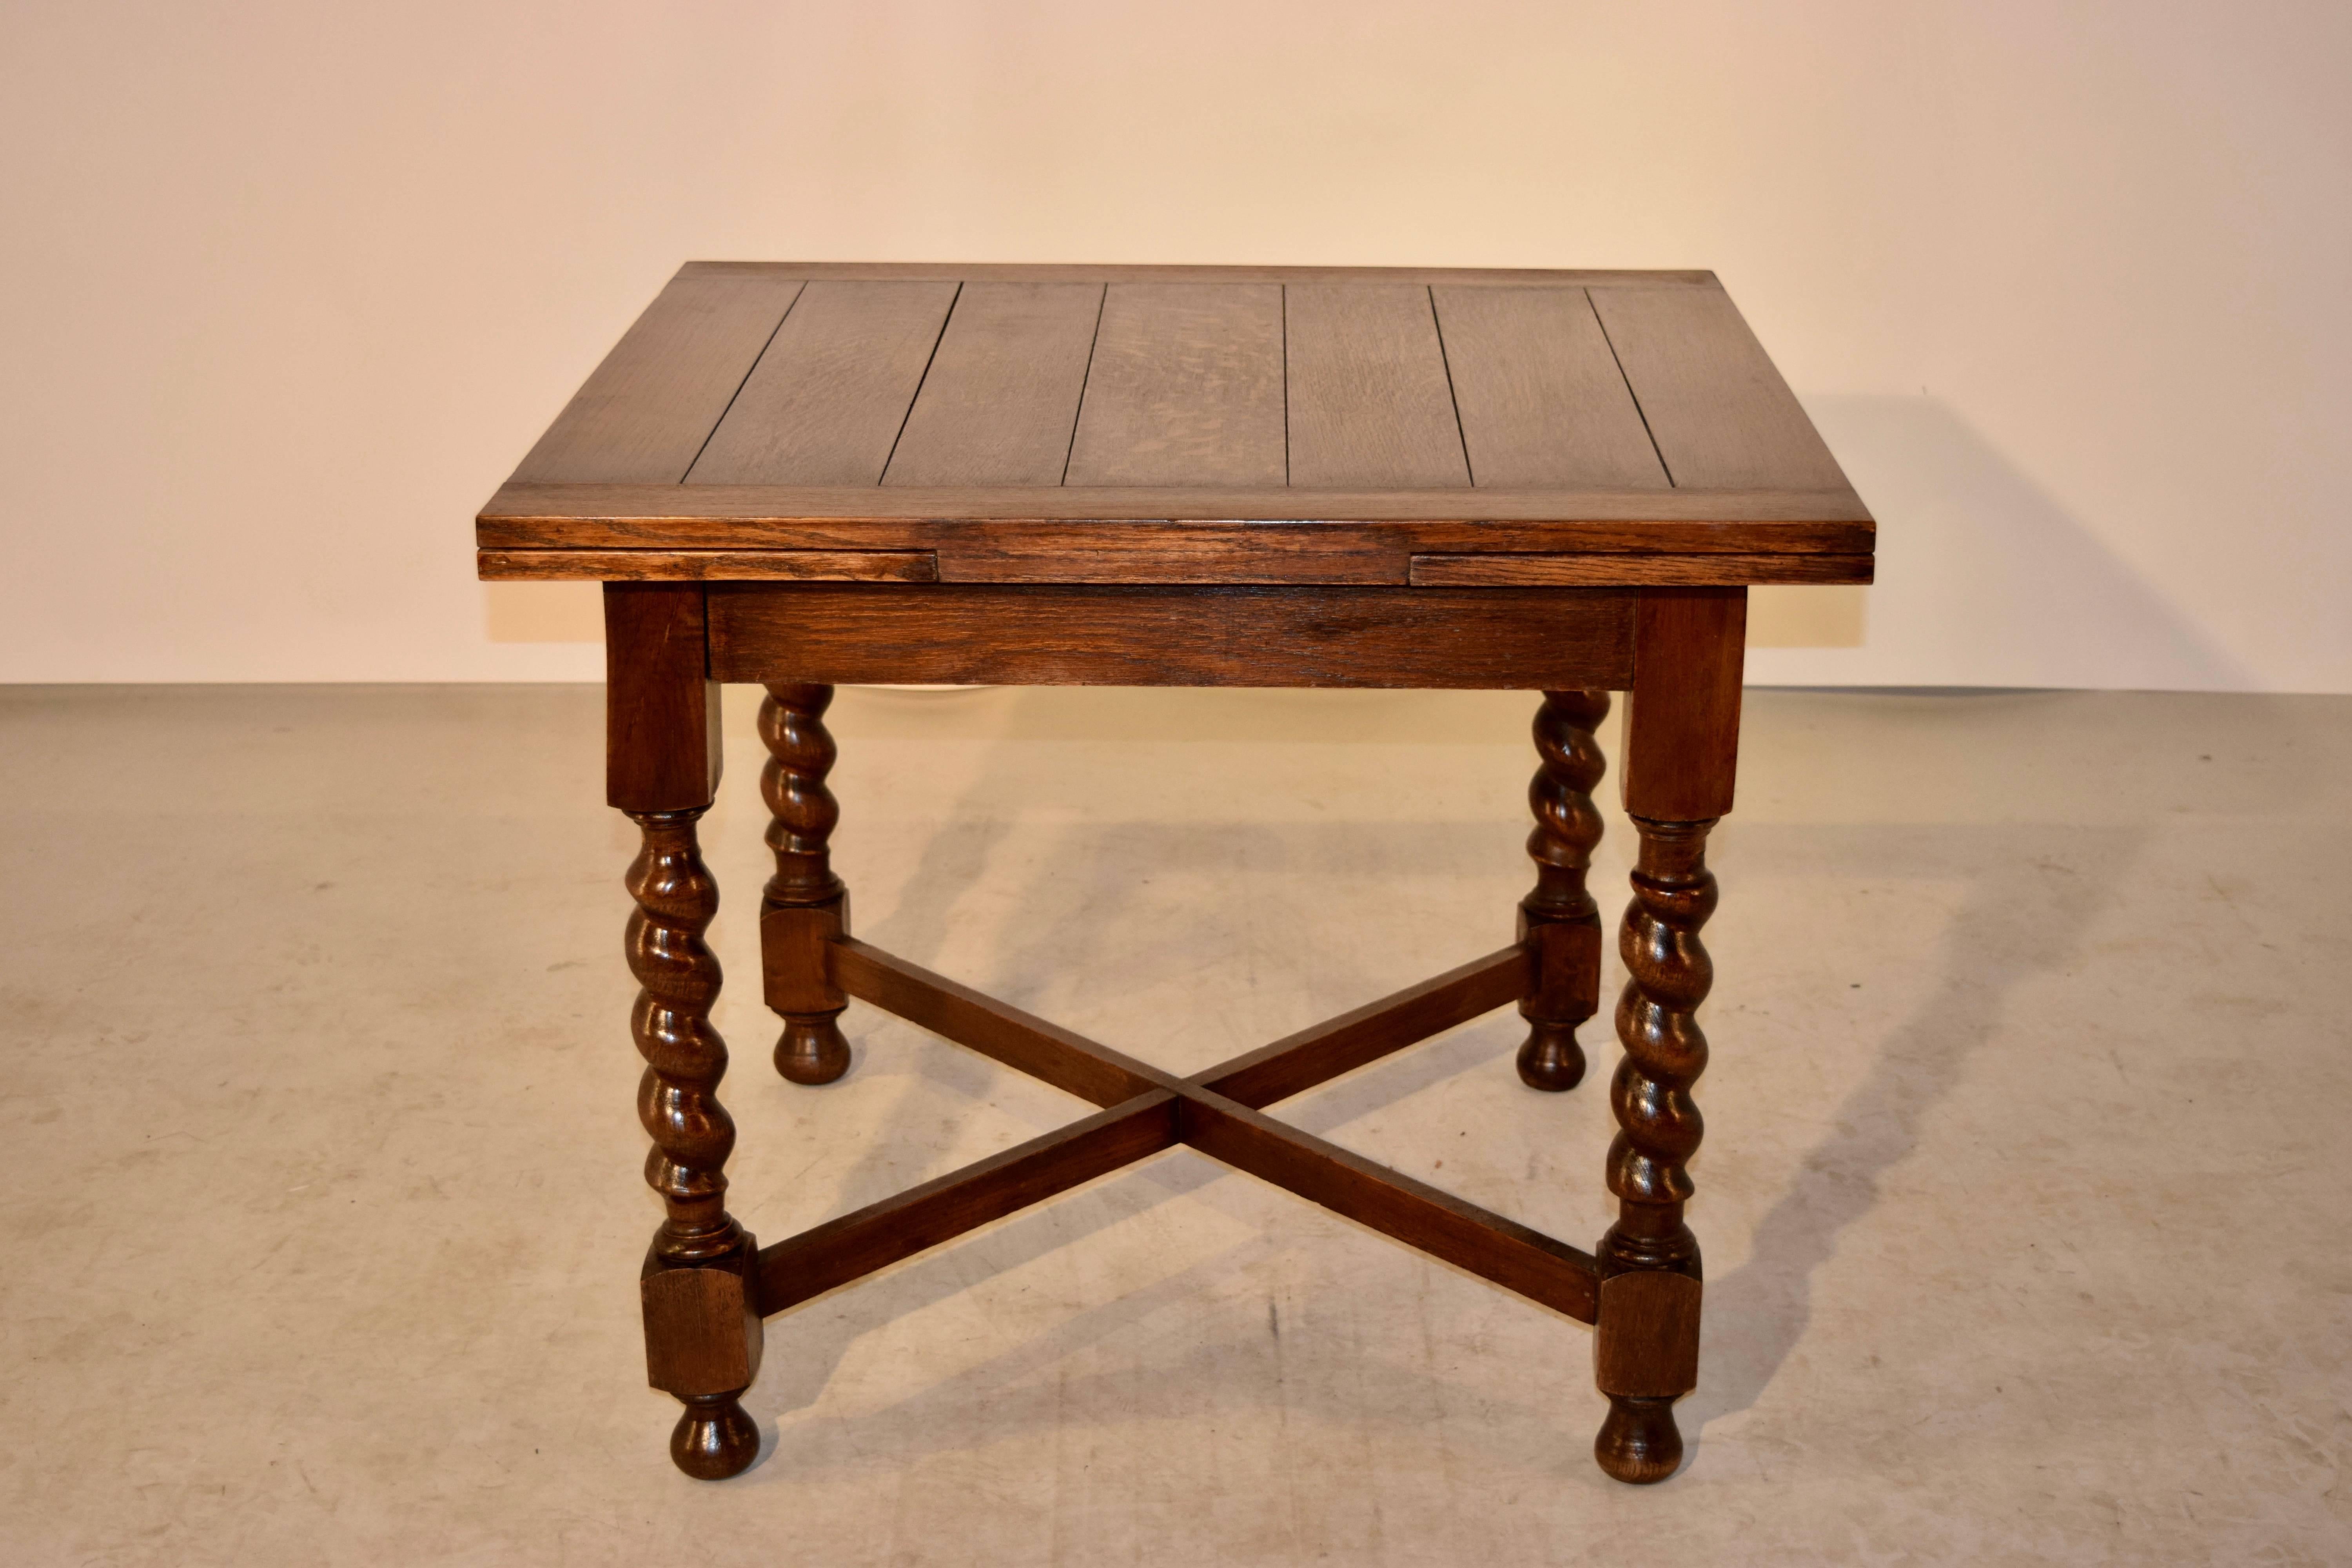 Edwardian English Oak Table with Draw-Leaves, circa 1900